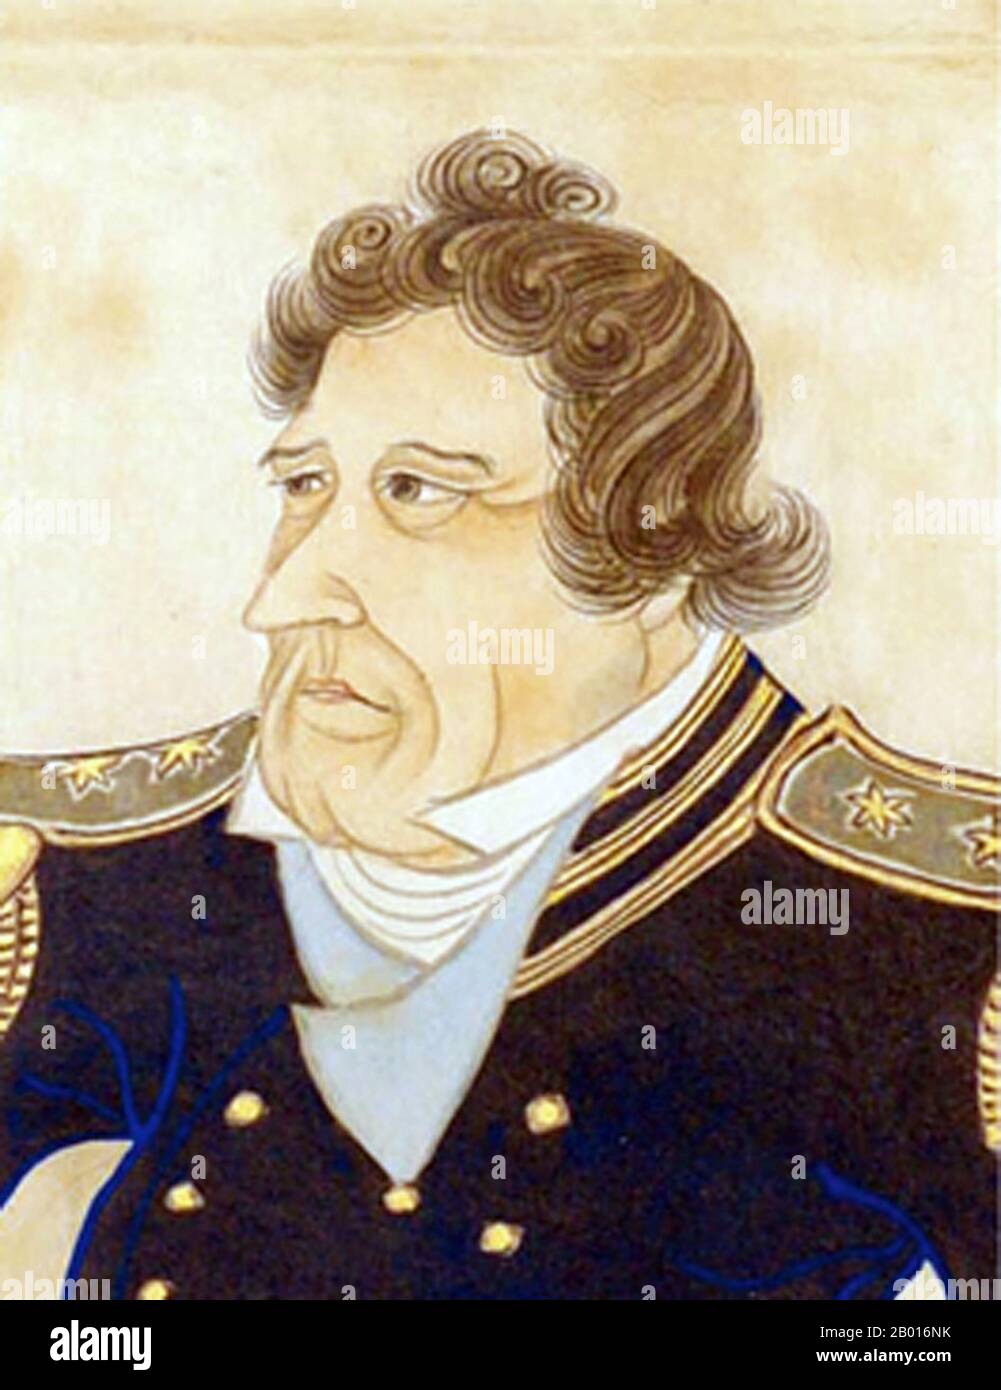 USA/Japan: Commodore Matthew Calbraith Perry (10 April 1794 - 4 March 1858). Painting by Hibata Osuke (fl. 19th century), c. 1854.  Matthew Calbraith Perry was a Commodore of the U.S. Navy who compelled the opening of Japan to the West with the Convention of Kanagawa in 1854, when he threatened to bombard Edo (Tokyo) with his ships should they resist. Perry had commanded ships in several wars, including the War of 1812 and the Mexican-American War (1846-1848). His advocacy for the modernisation of the U.S. Navy led to him being called 'The Father of the Steam Navy'. Stock Photo